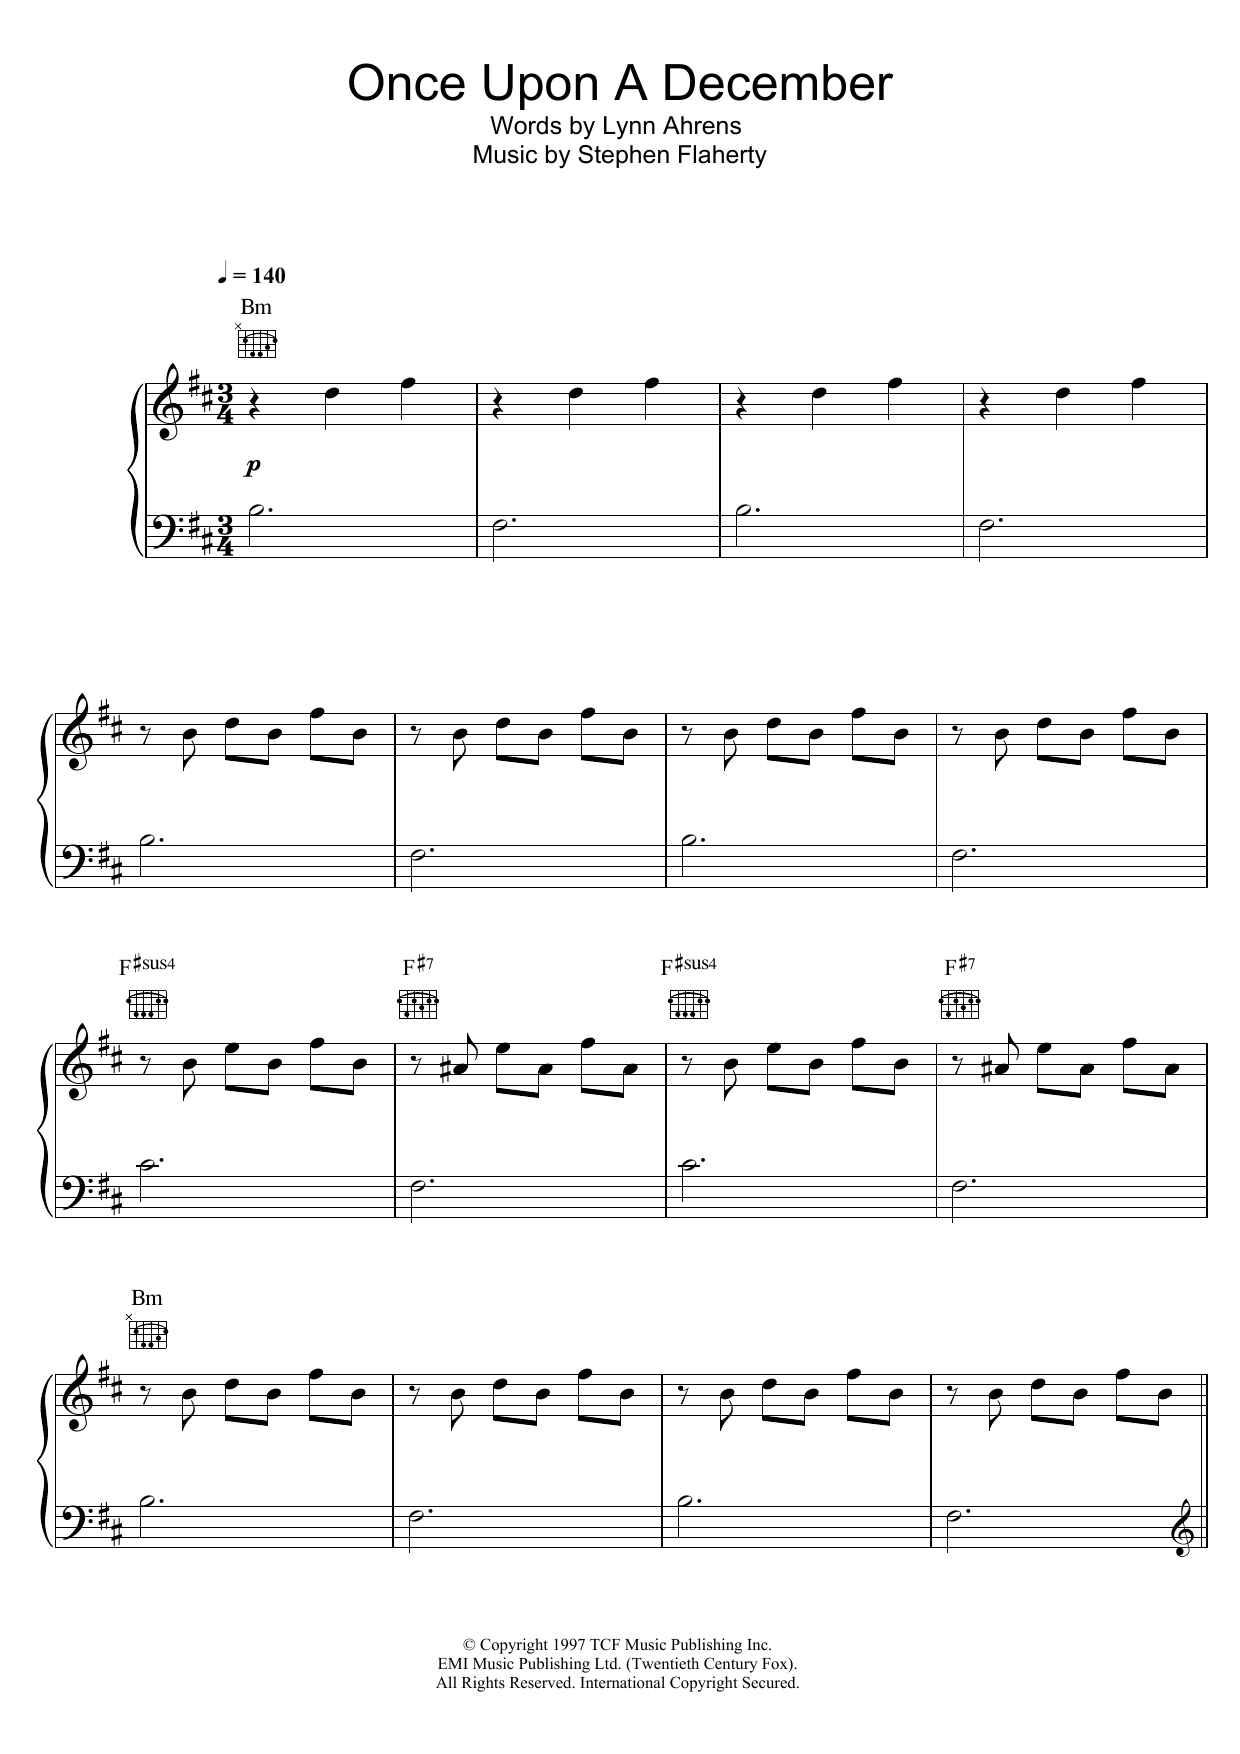 once upon a december sheet music free download